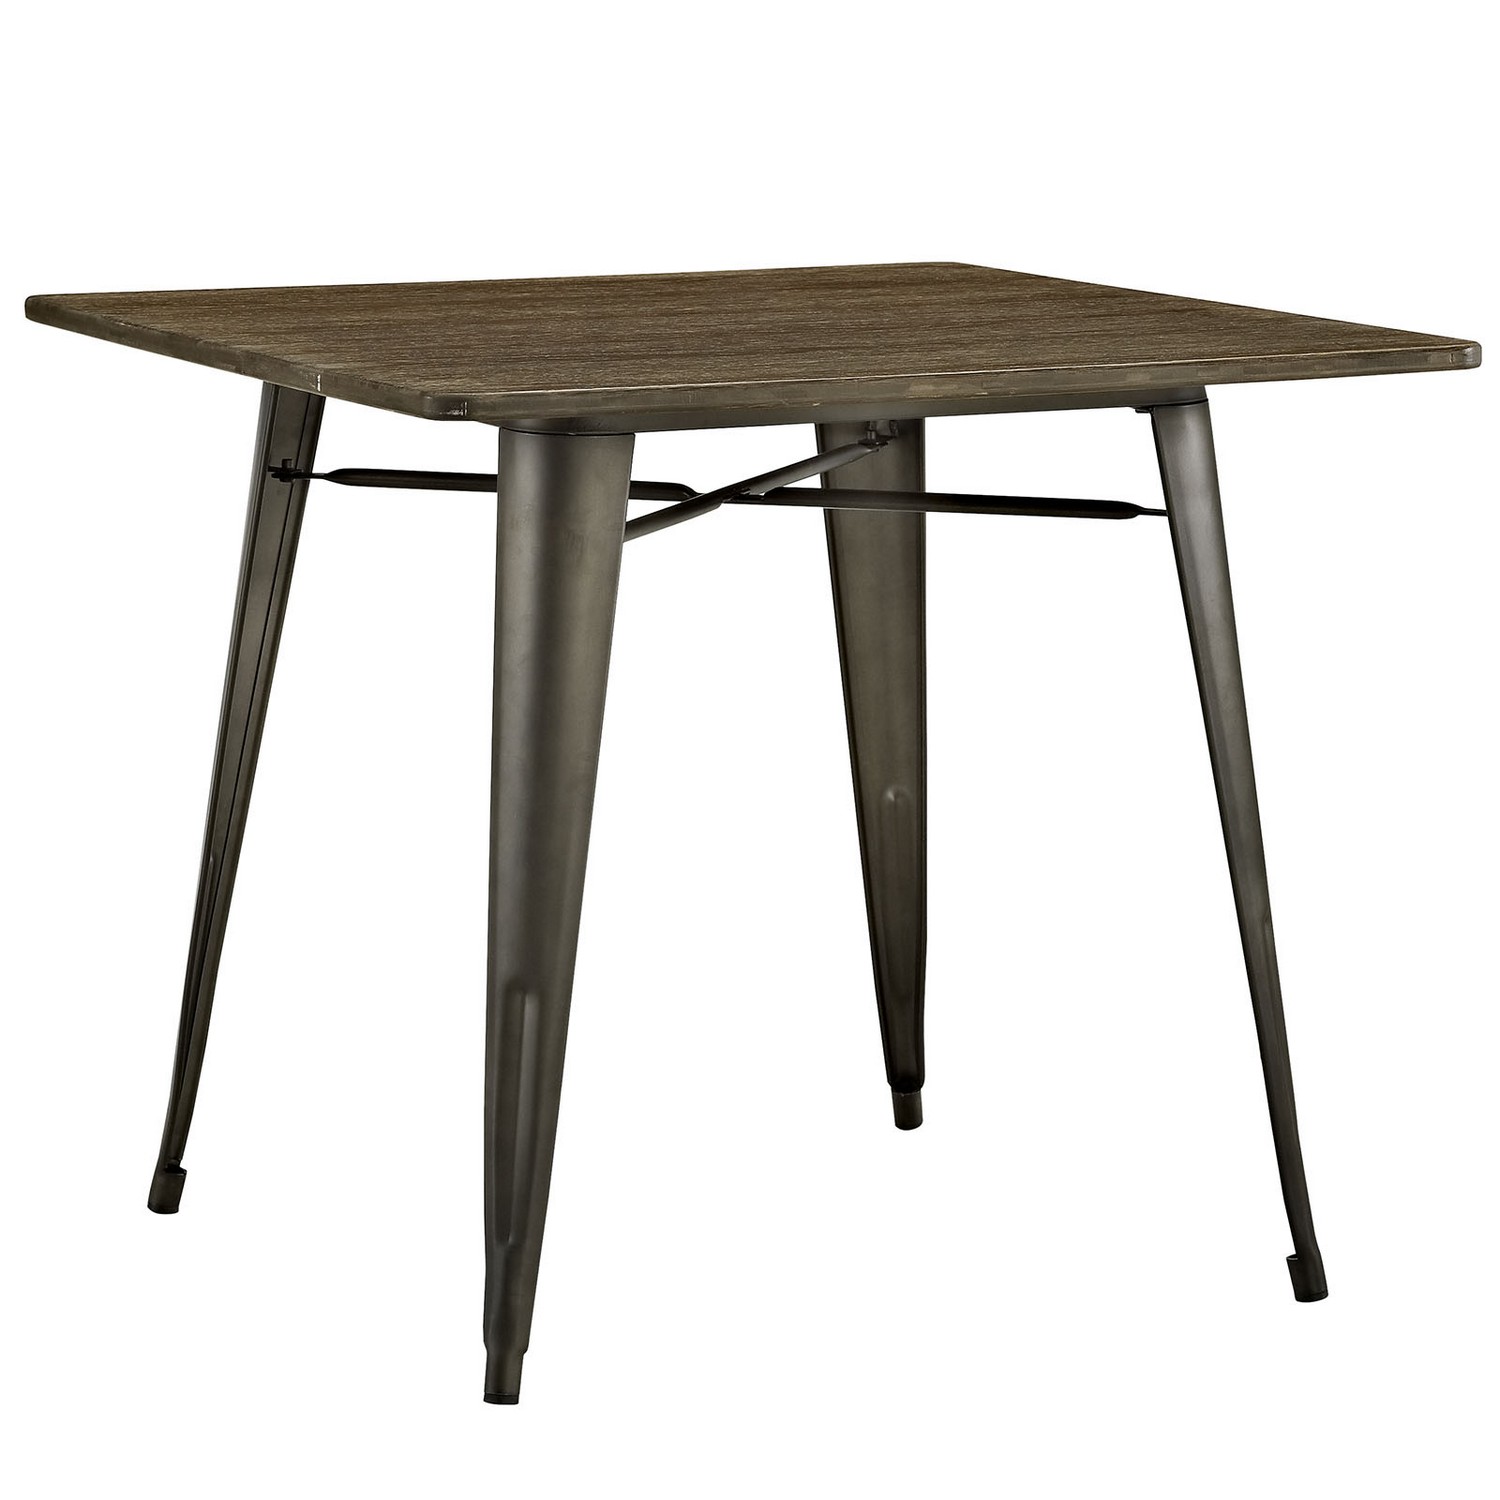 Modway Alacrity 36-inch Square Wood Dining Table - Brown